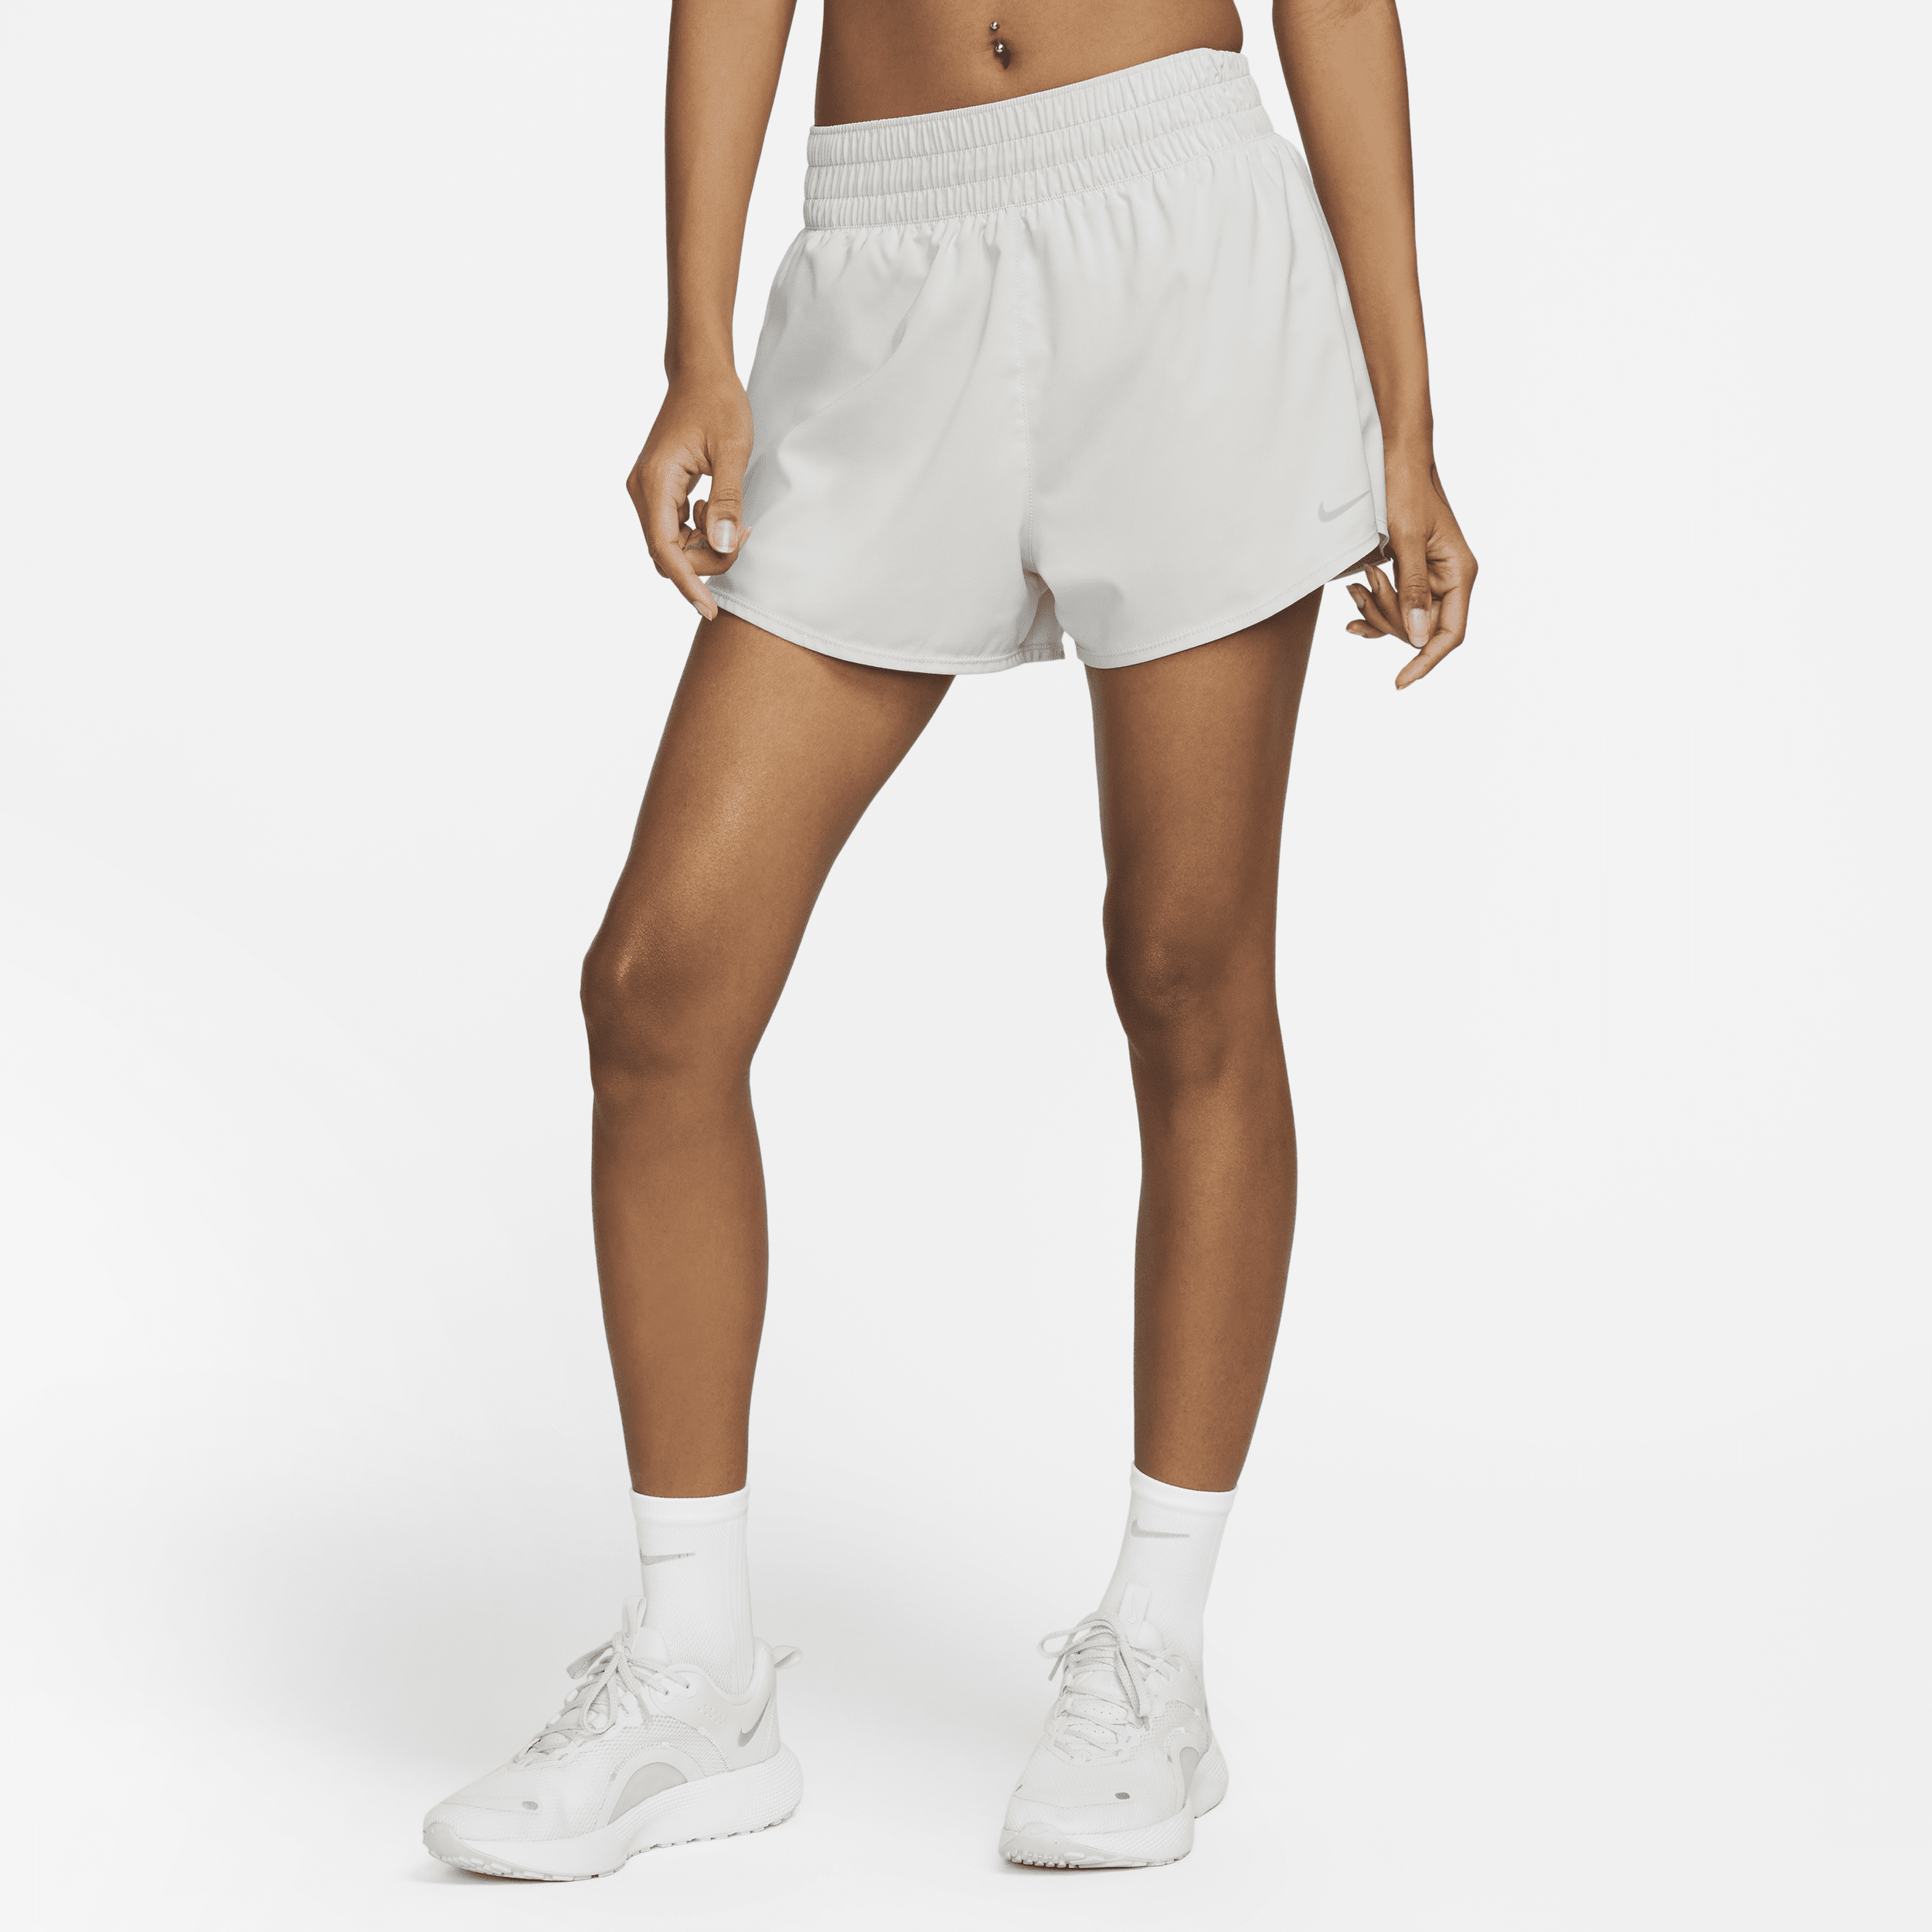 NIKE WOMEN'S ONE DRI-FIT HIGH-WAISTED 3" 2-IN-1 SHORTS,1008061700